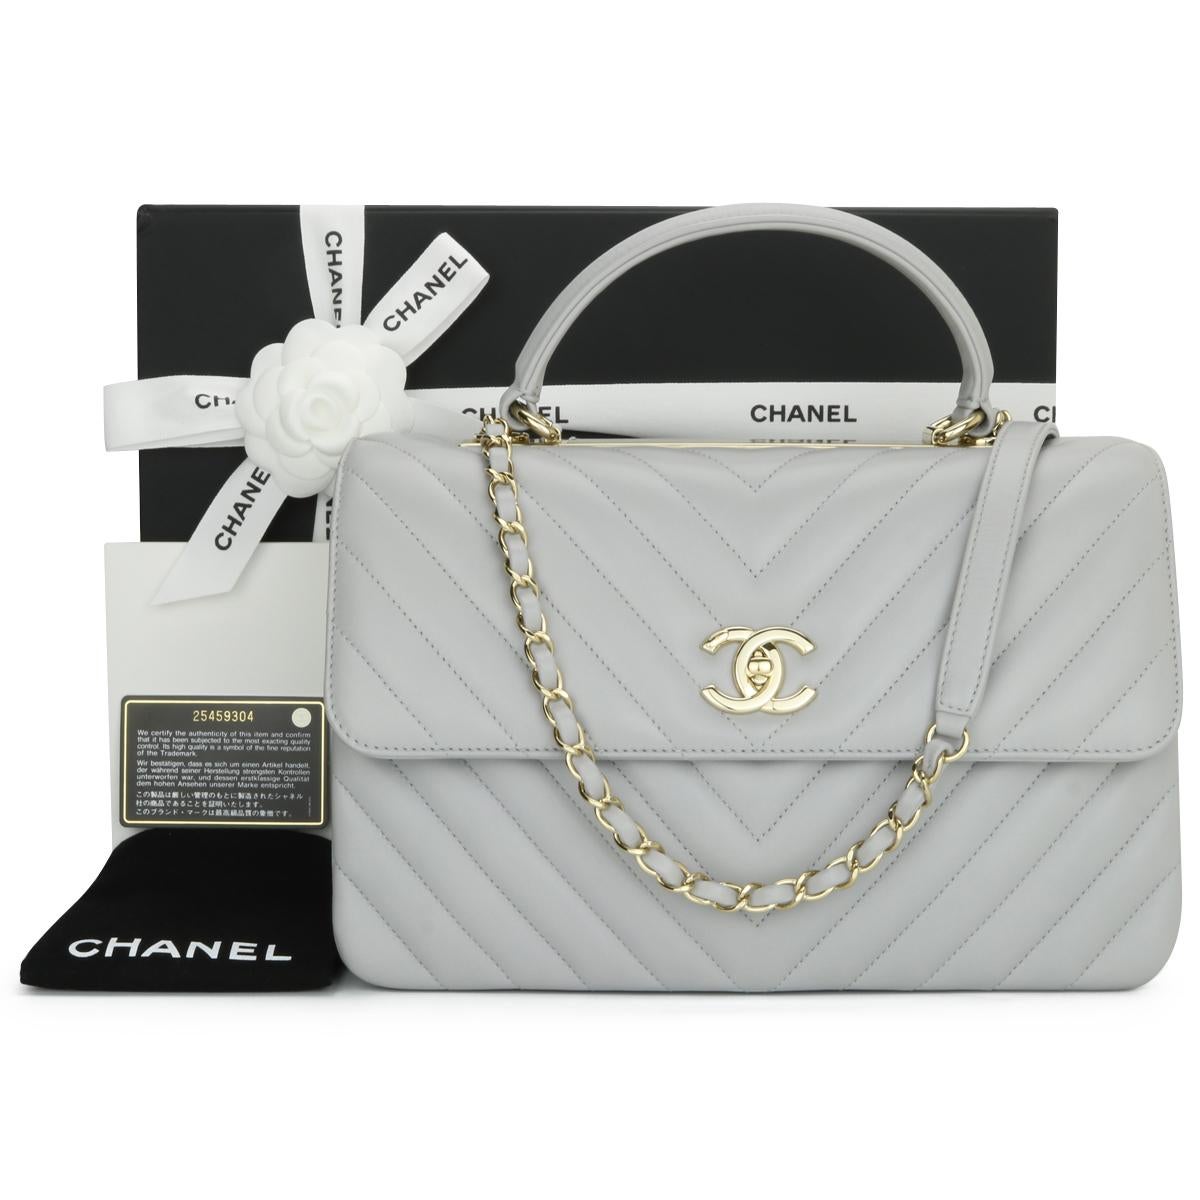 CHANEL Trendy CC Top Handle Bag Medium Grey Chevron Lambskin with Light Gold Hardware 2018.

This stunning bag is in never worn condition, the bag still holds its original shape, and the hardware is still very shiny. The leather smells fresh as if